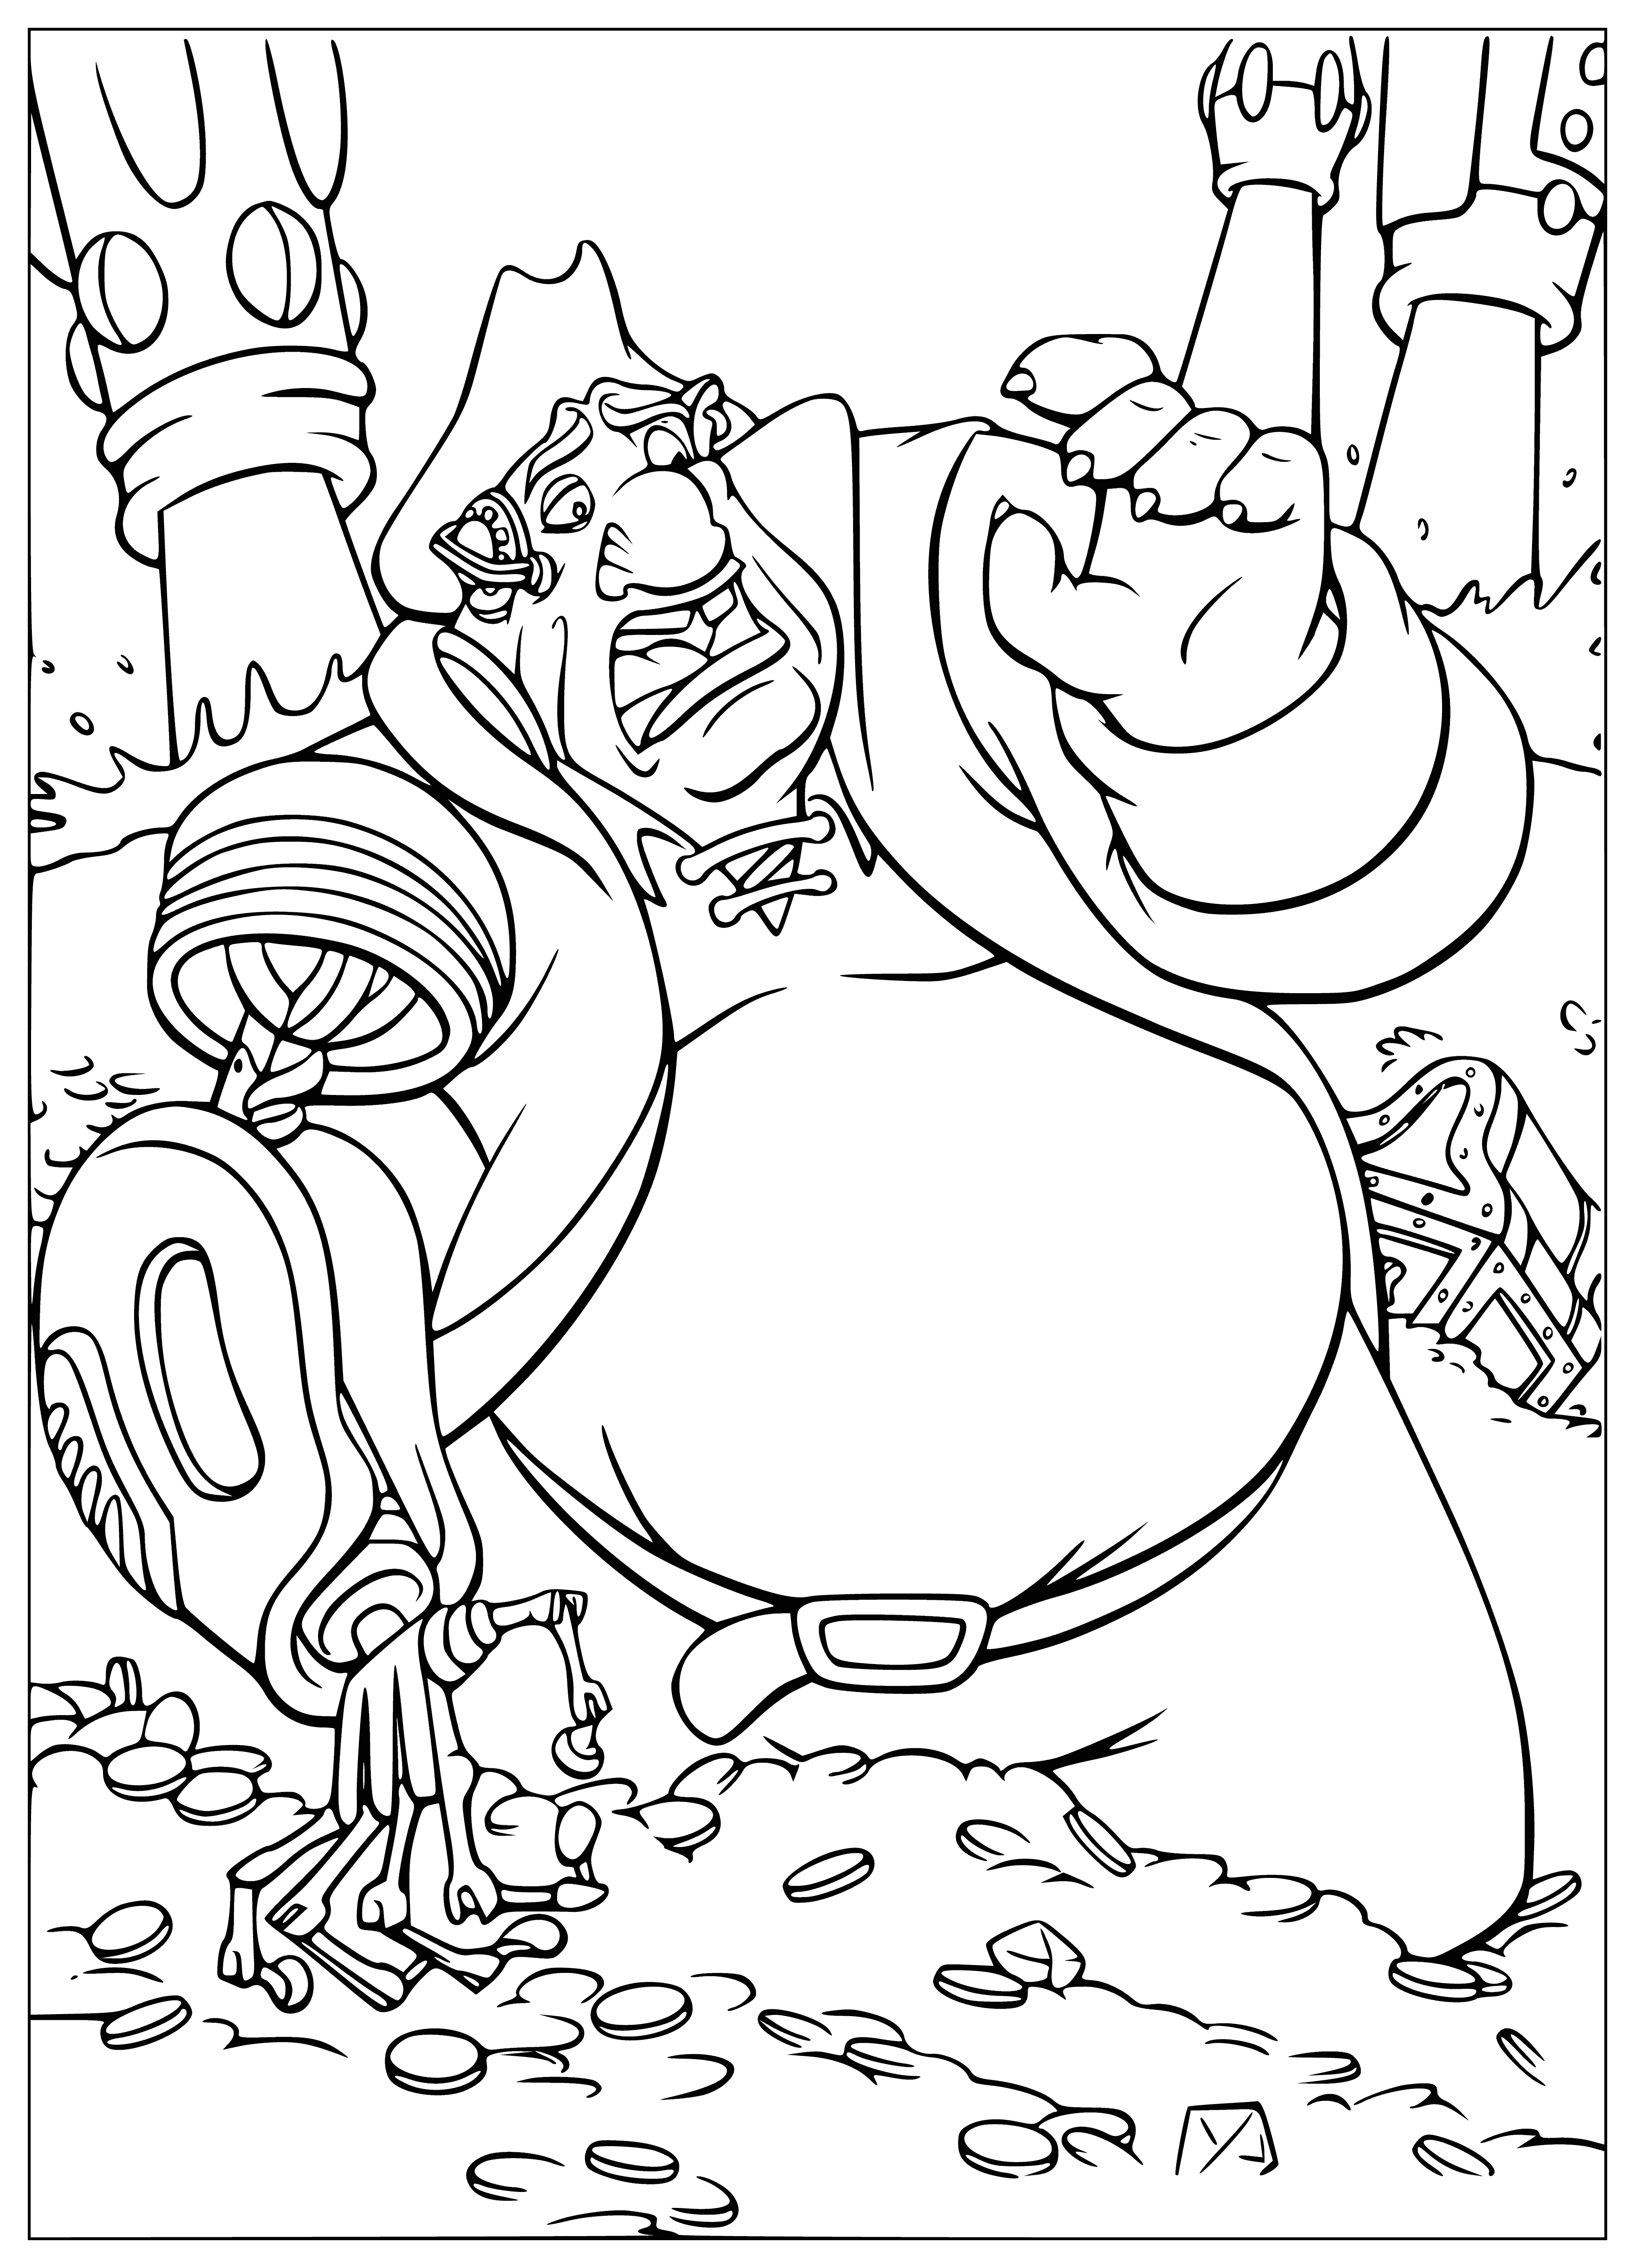 coloring page: Pirates find treasure on a planet with an "X". Chest is open & gold coins are spilling out.